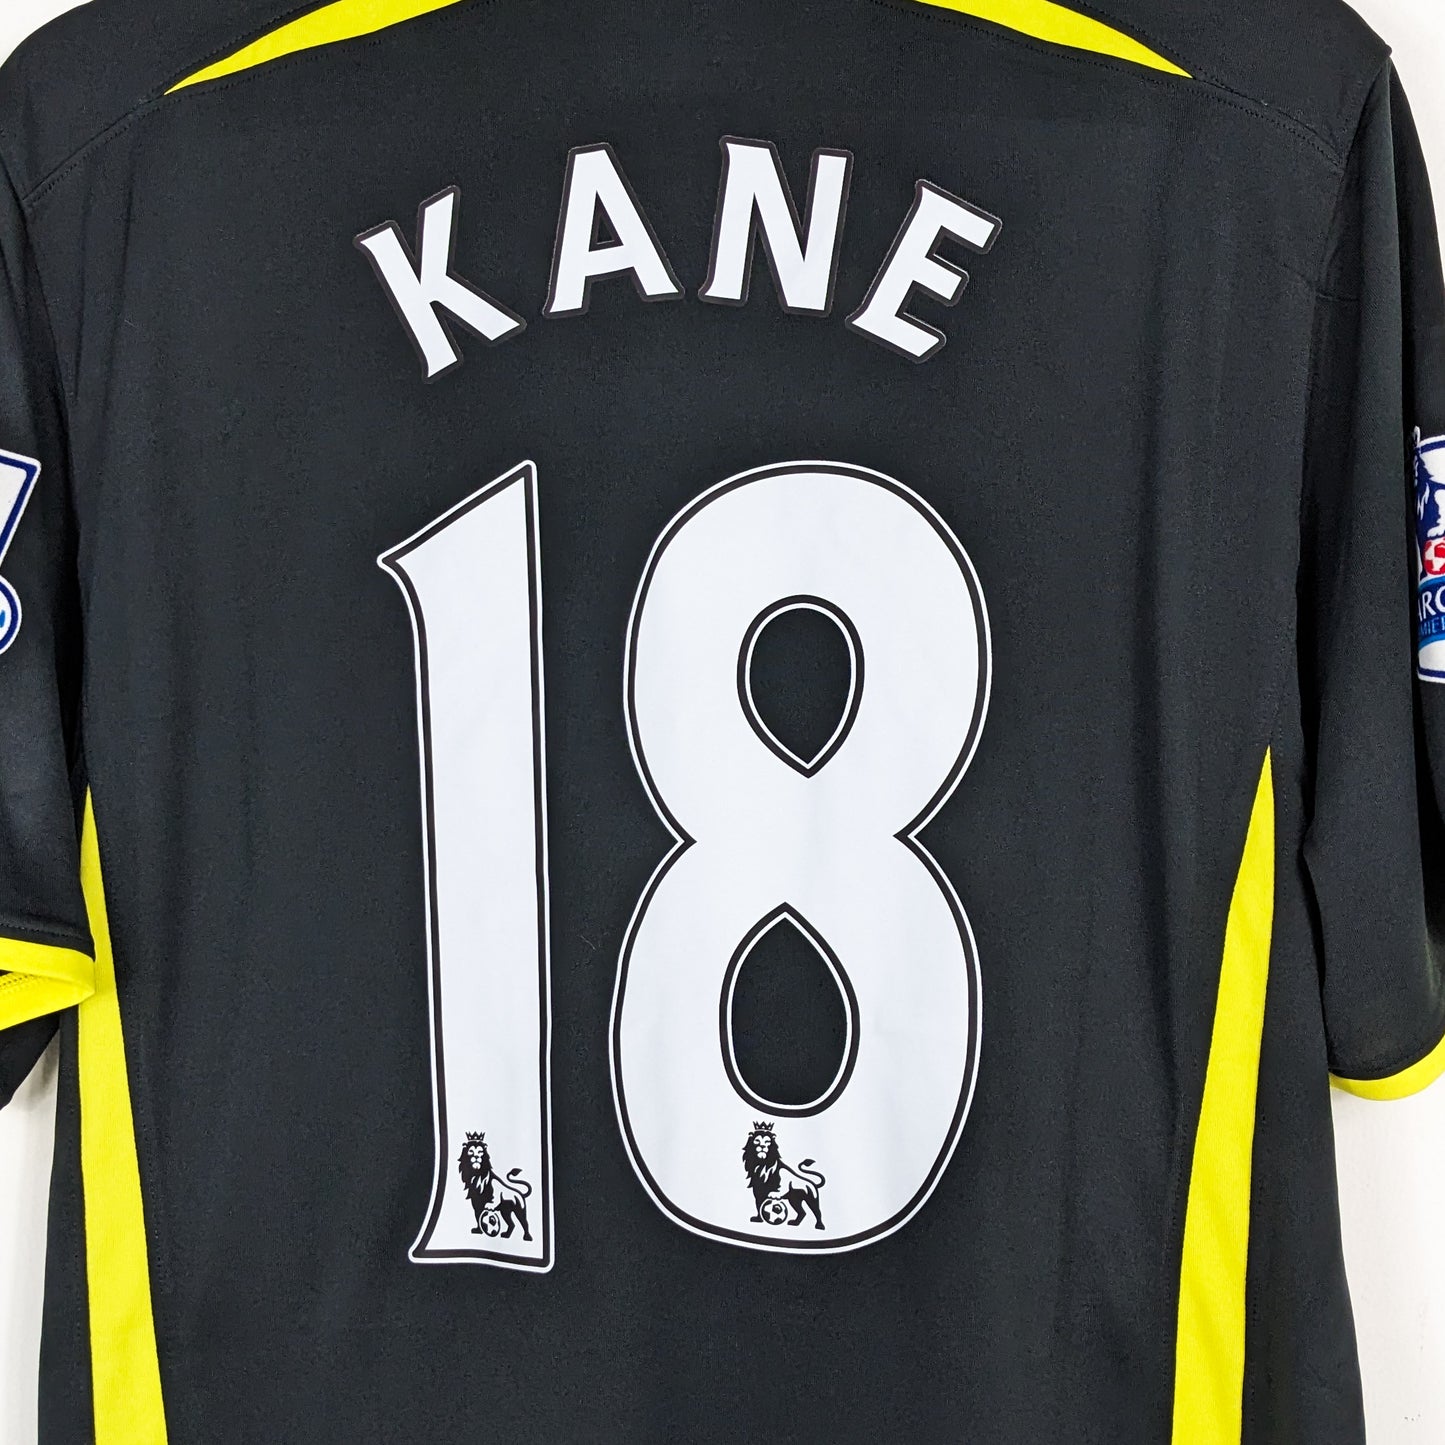 Authentic Tottenham 2015/2016 Away - Kane #18 Size L (With tags)